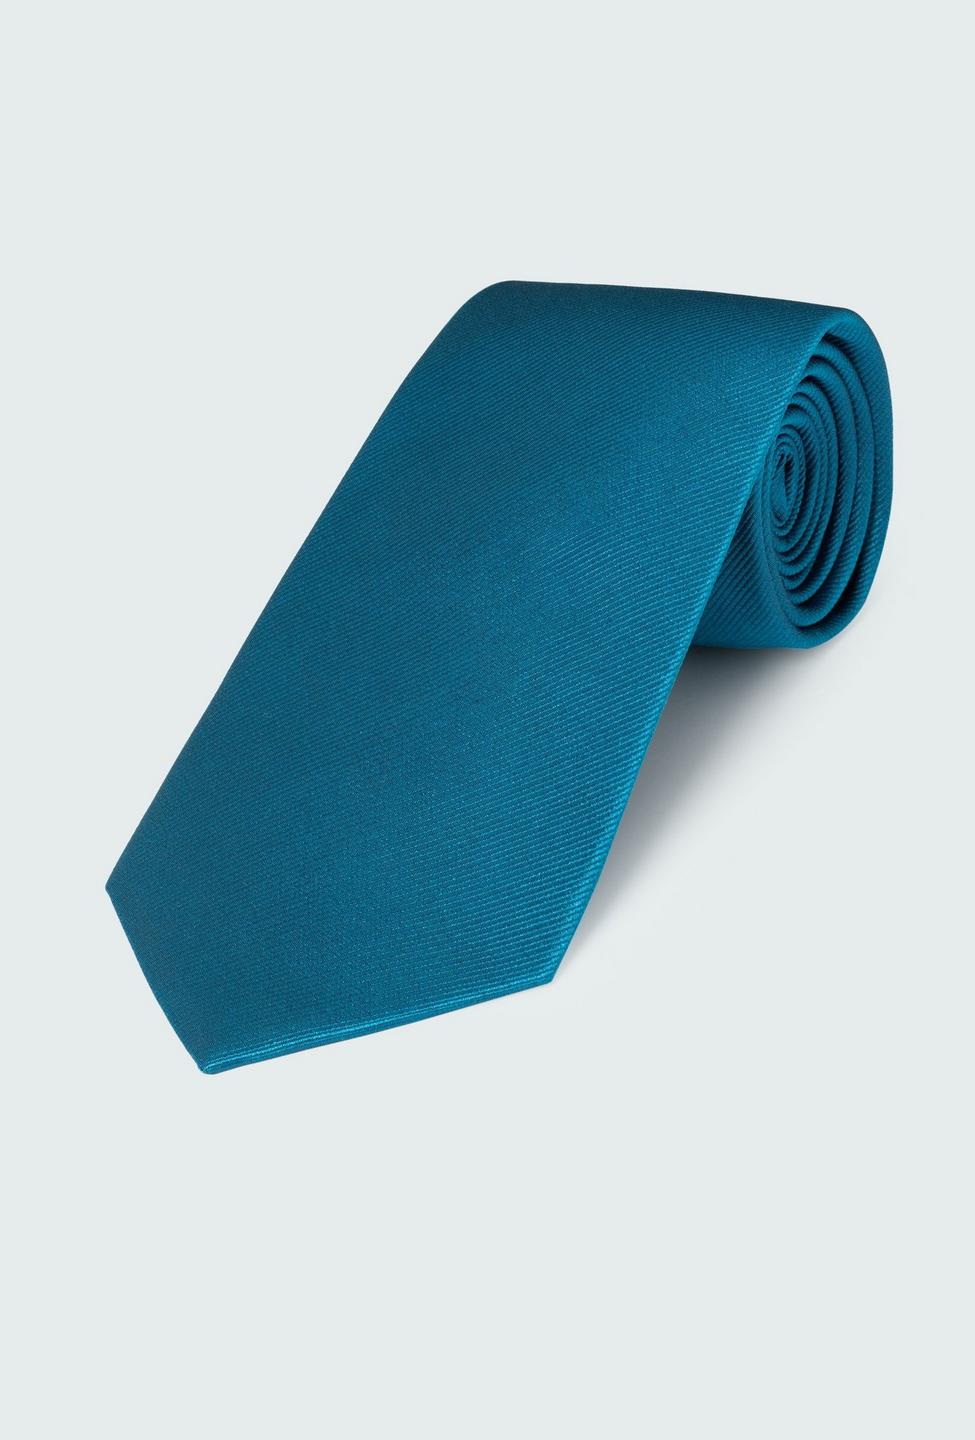 Green tie - Solid Design from Indochino Collection